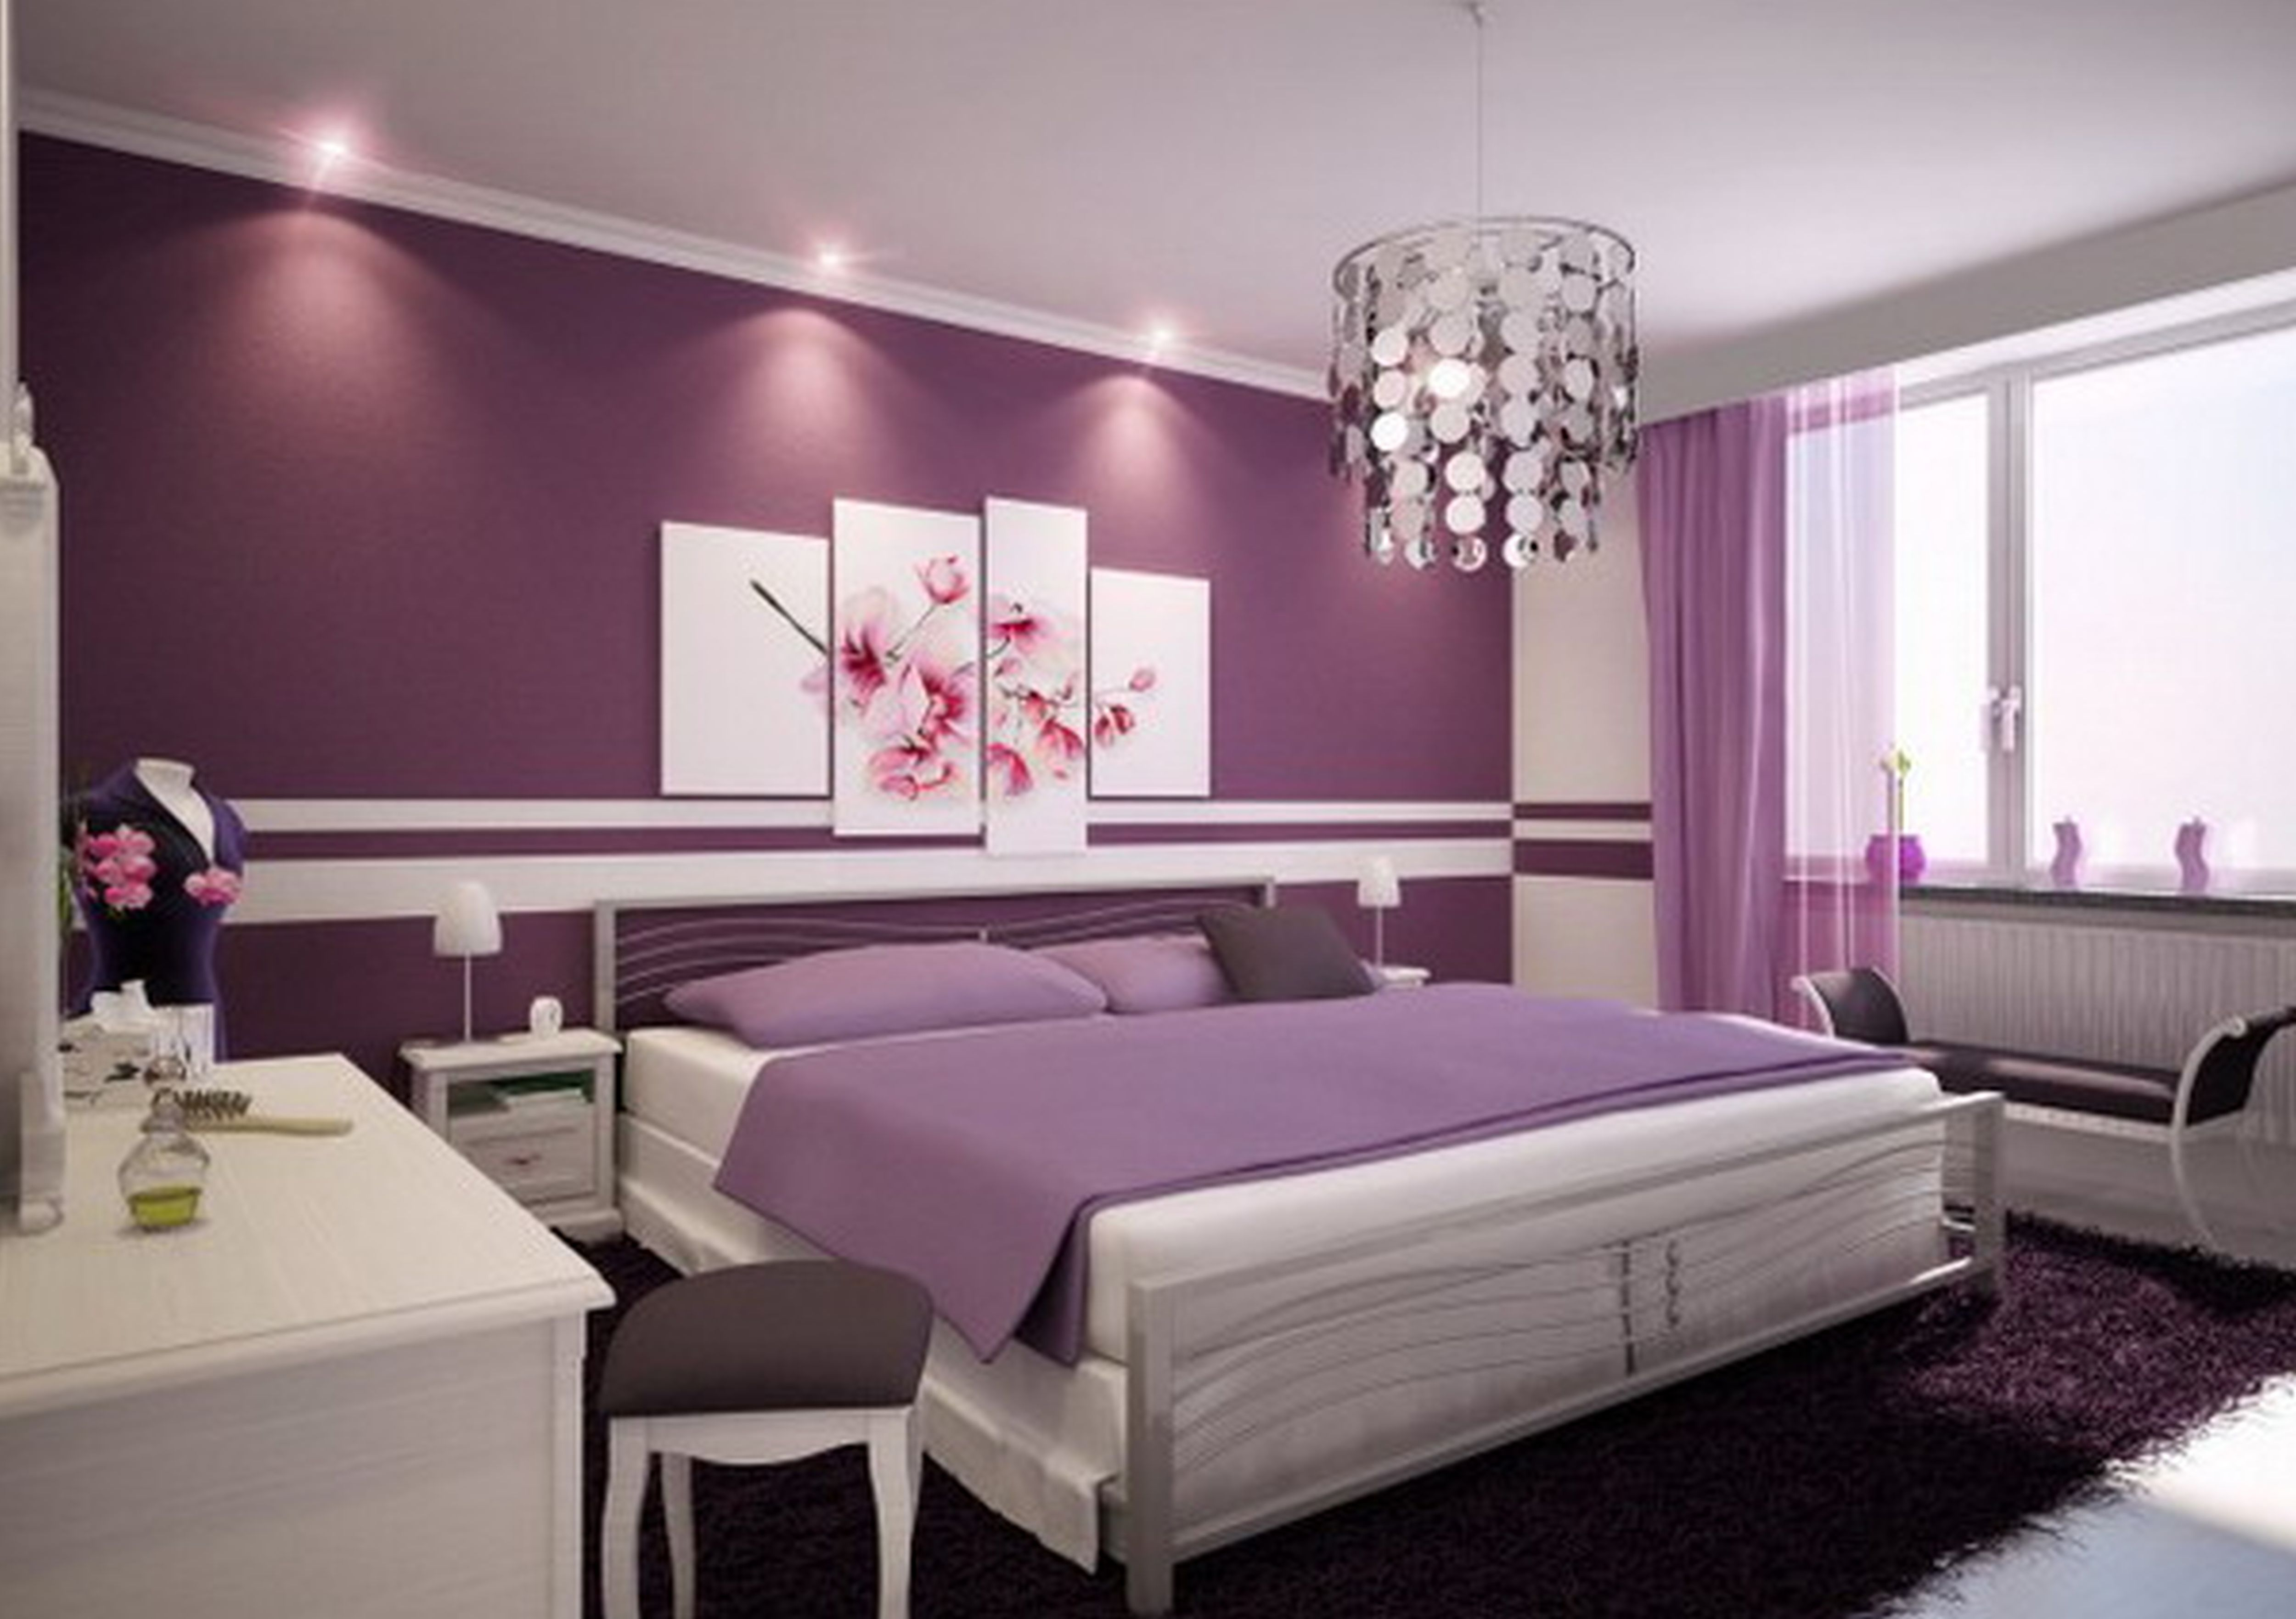 Bedroom Bedroom Bedroom Great Purple Bedroom Color Paint in sizing 5000 X 3525